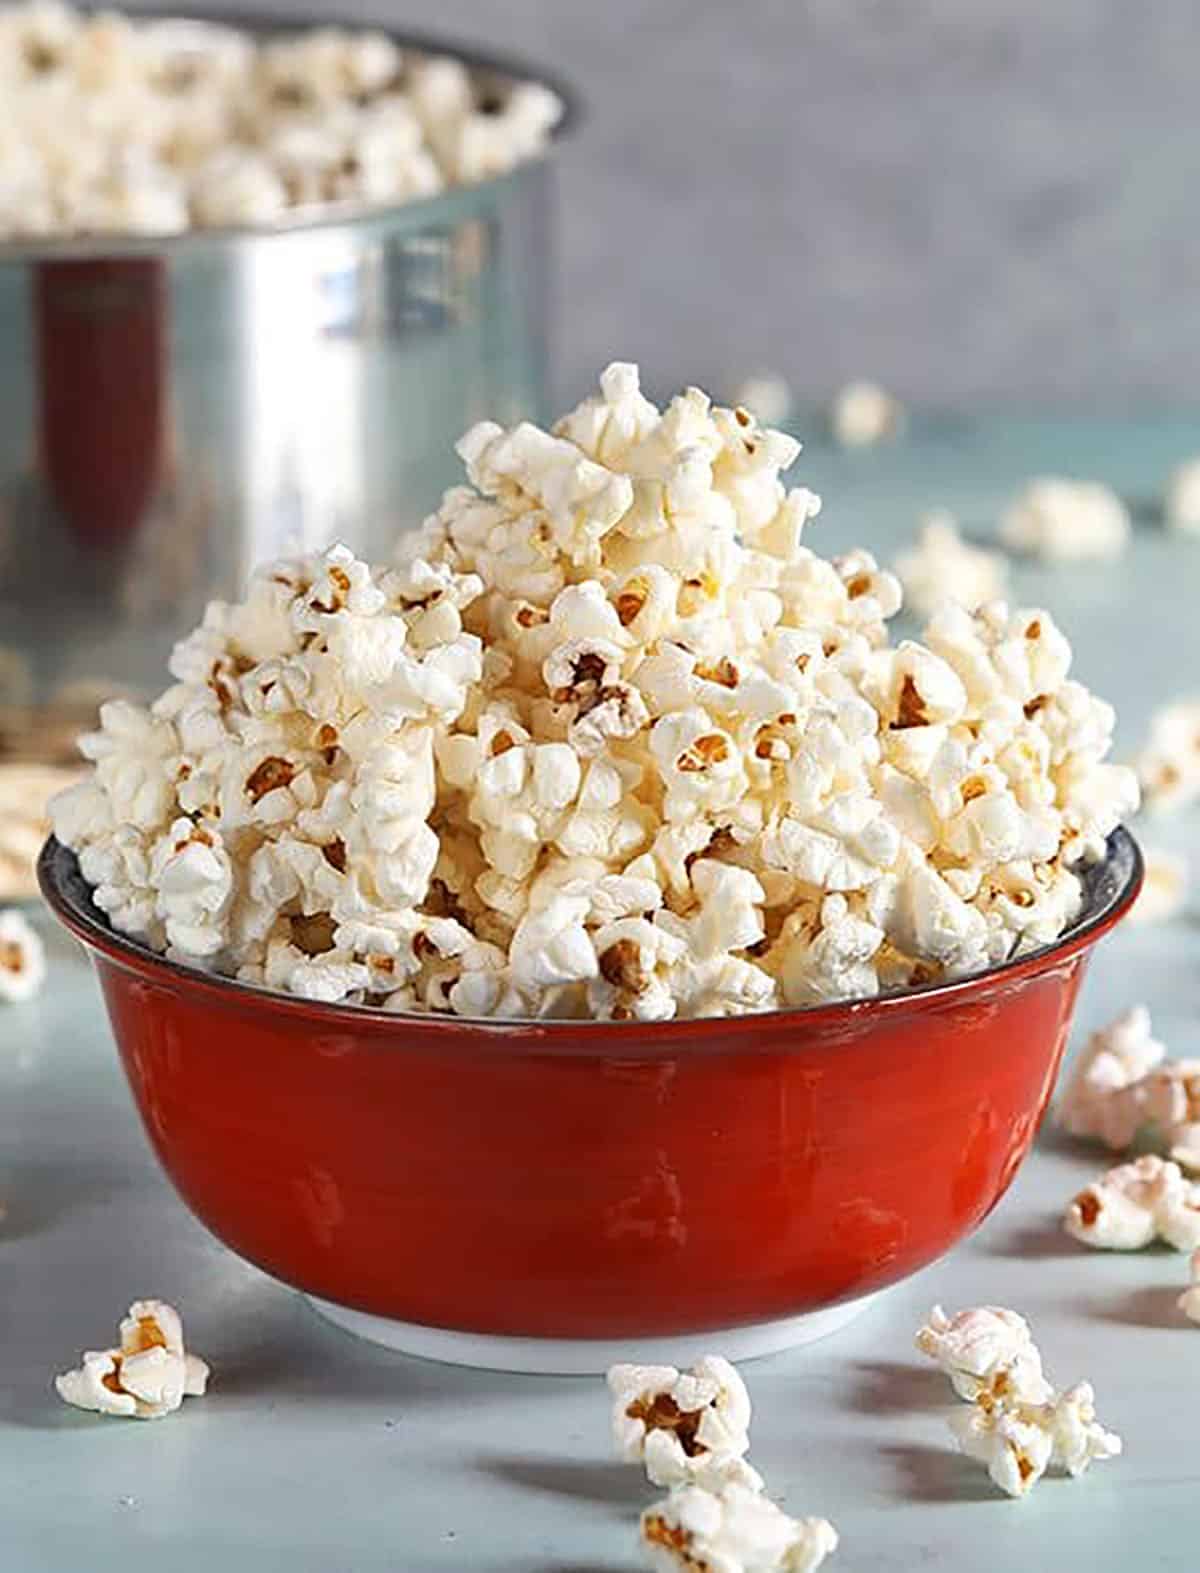 Stovetop popcorn in a red bowl on a blue background.